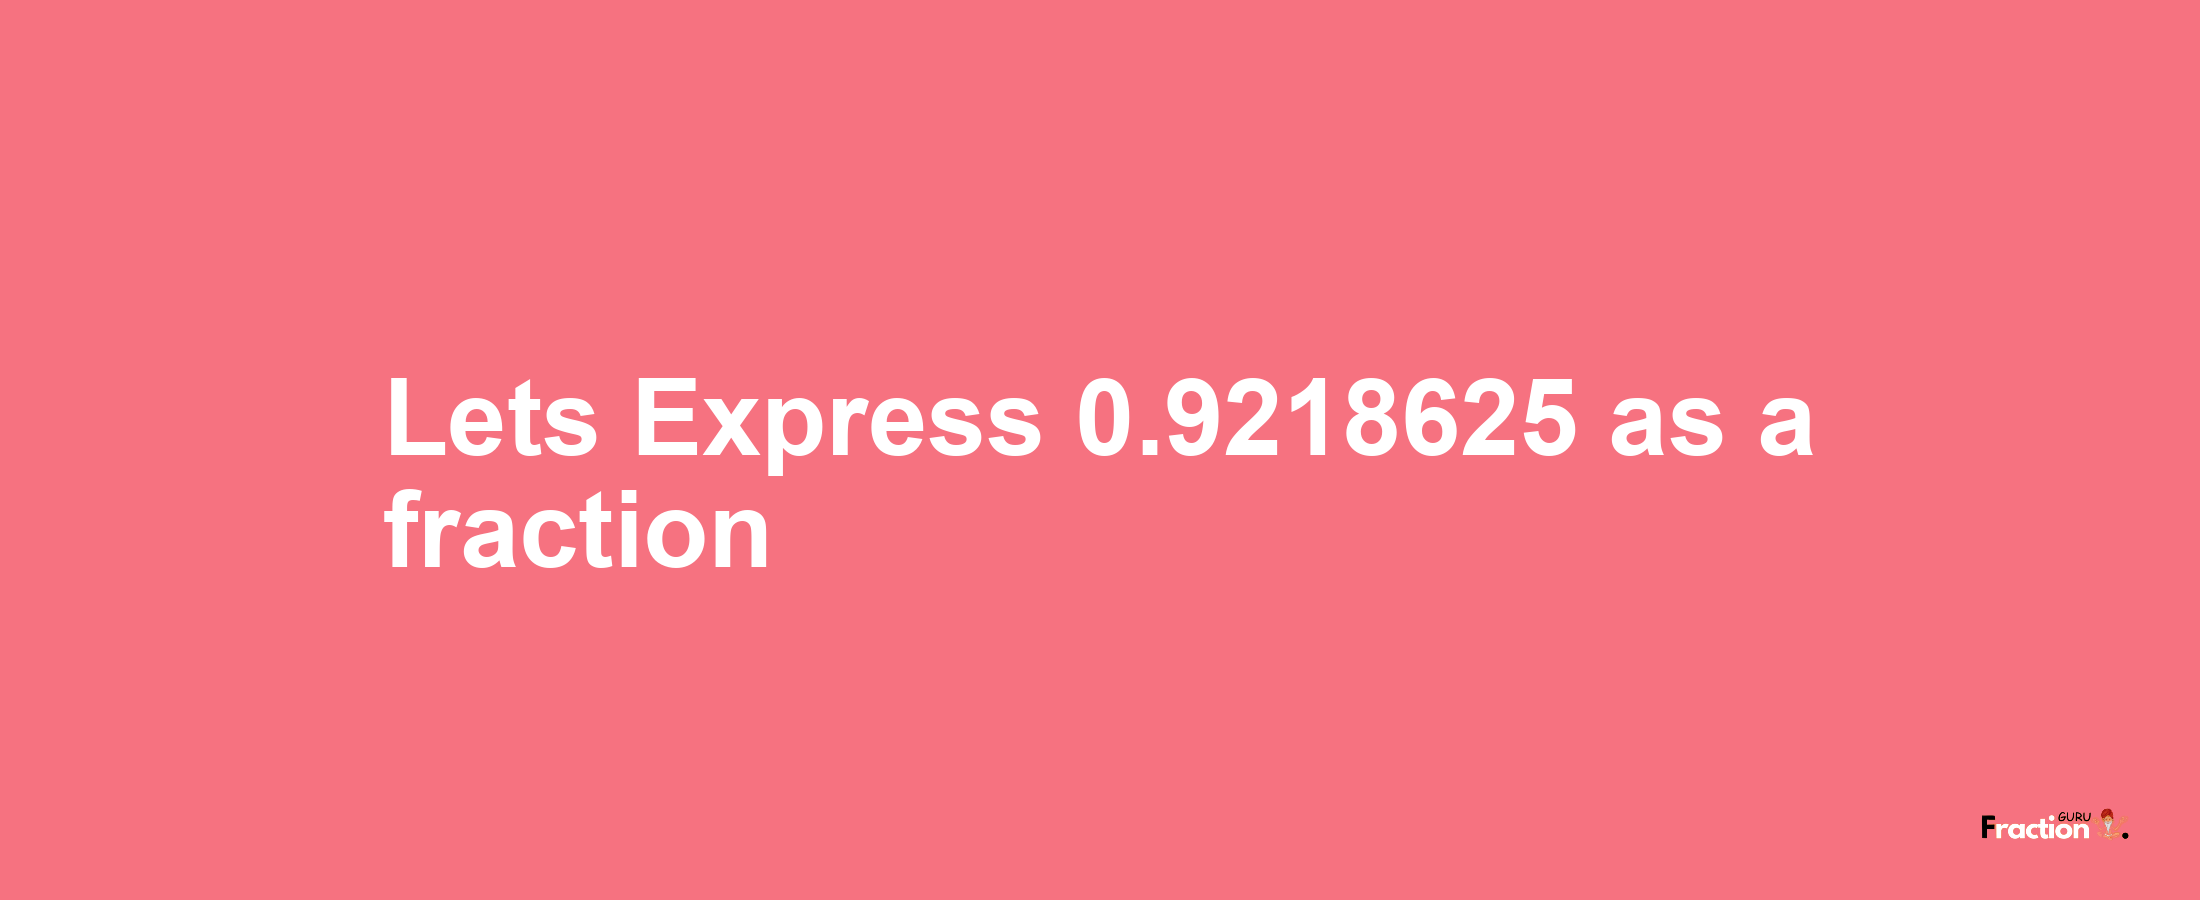 Lets Express 0.9218625 as afraction